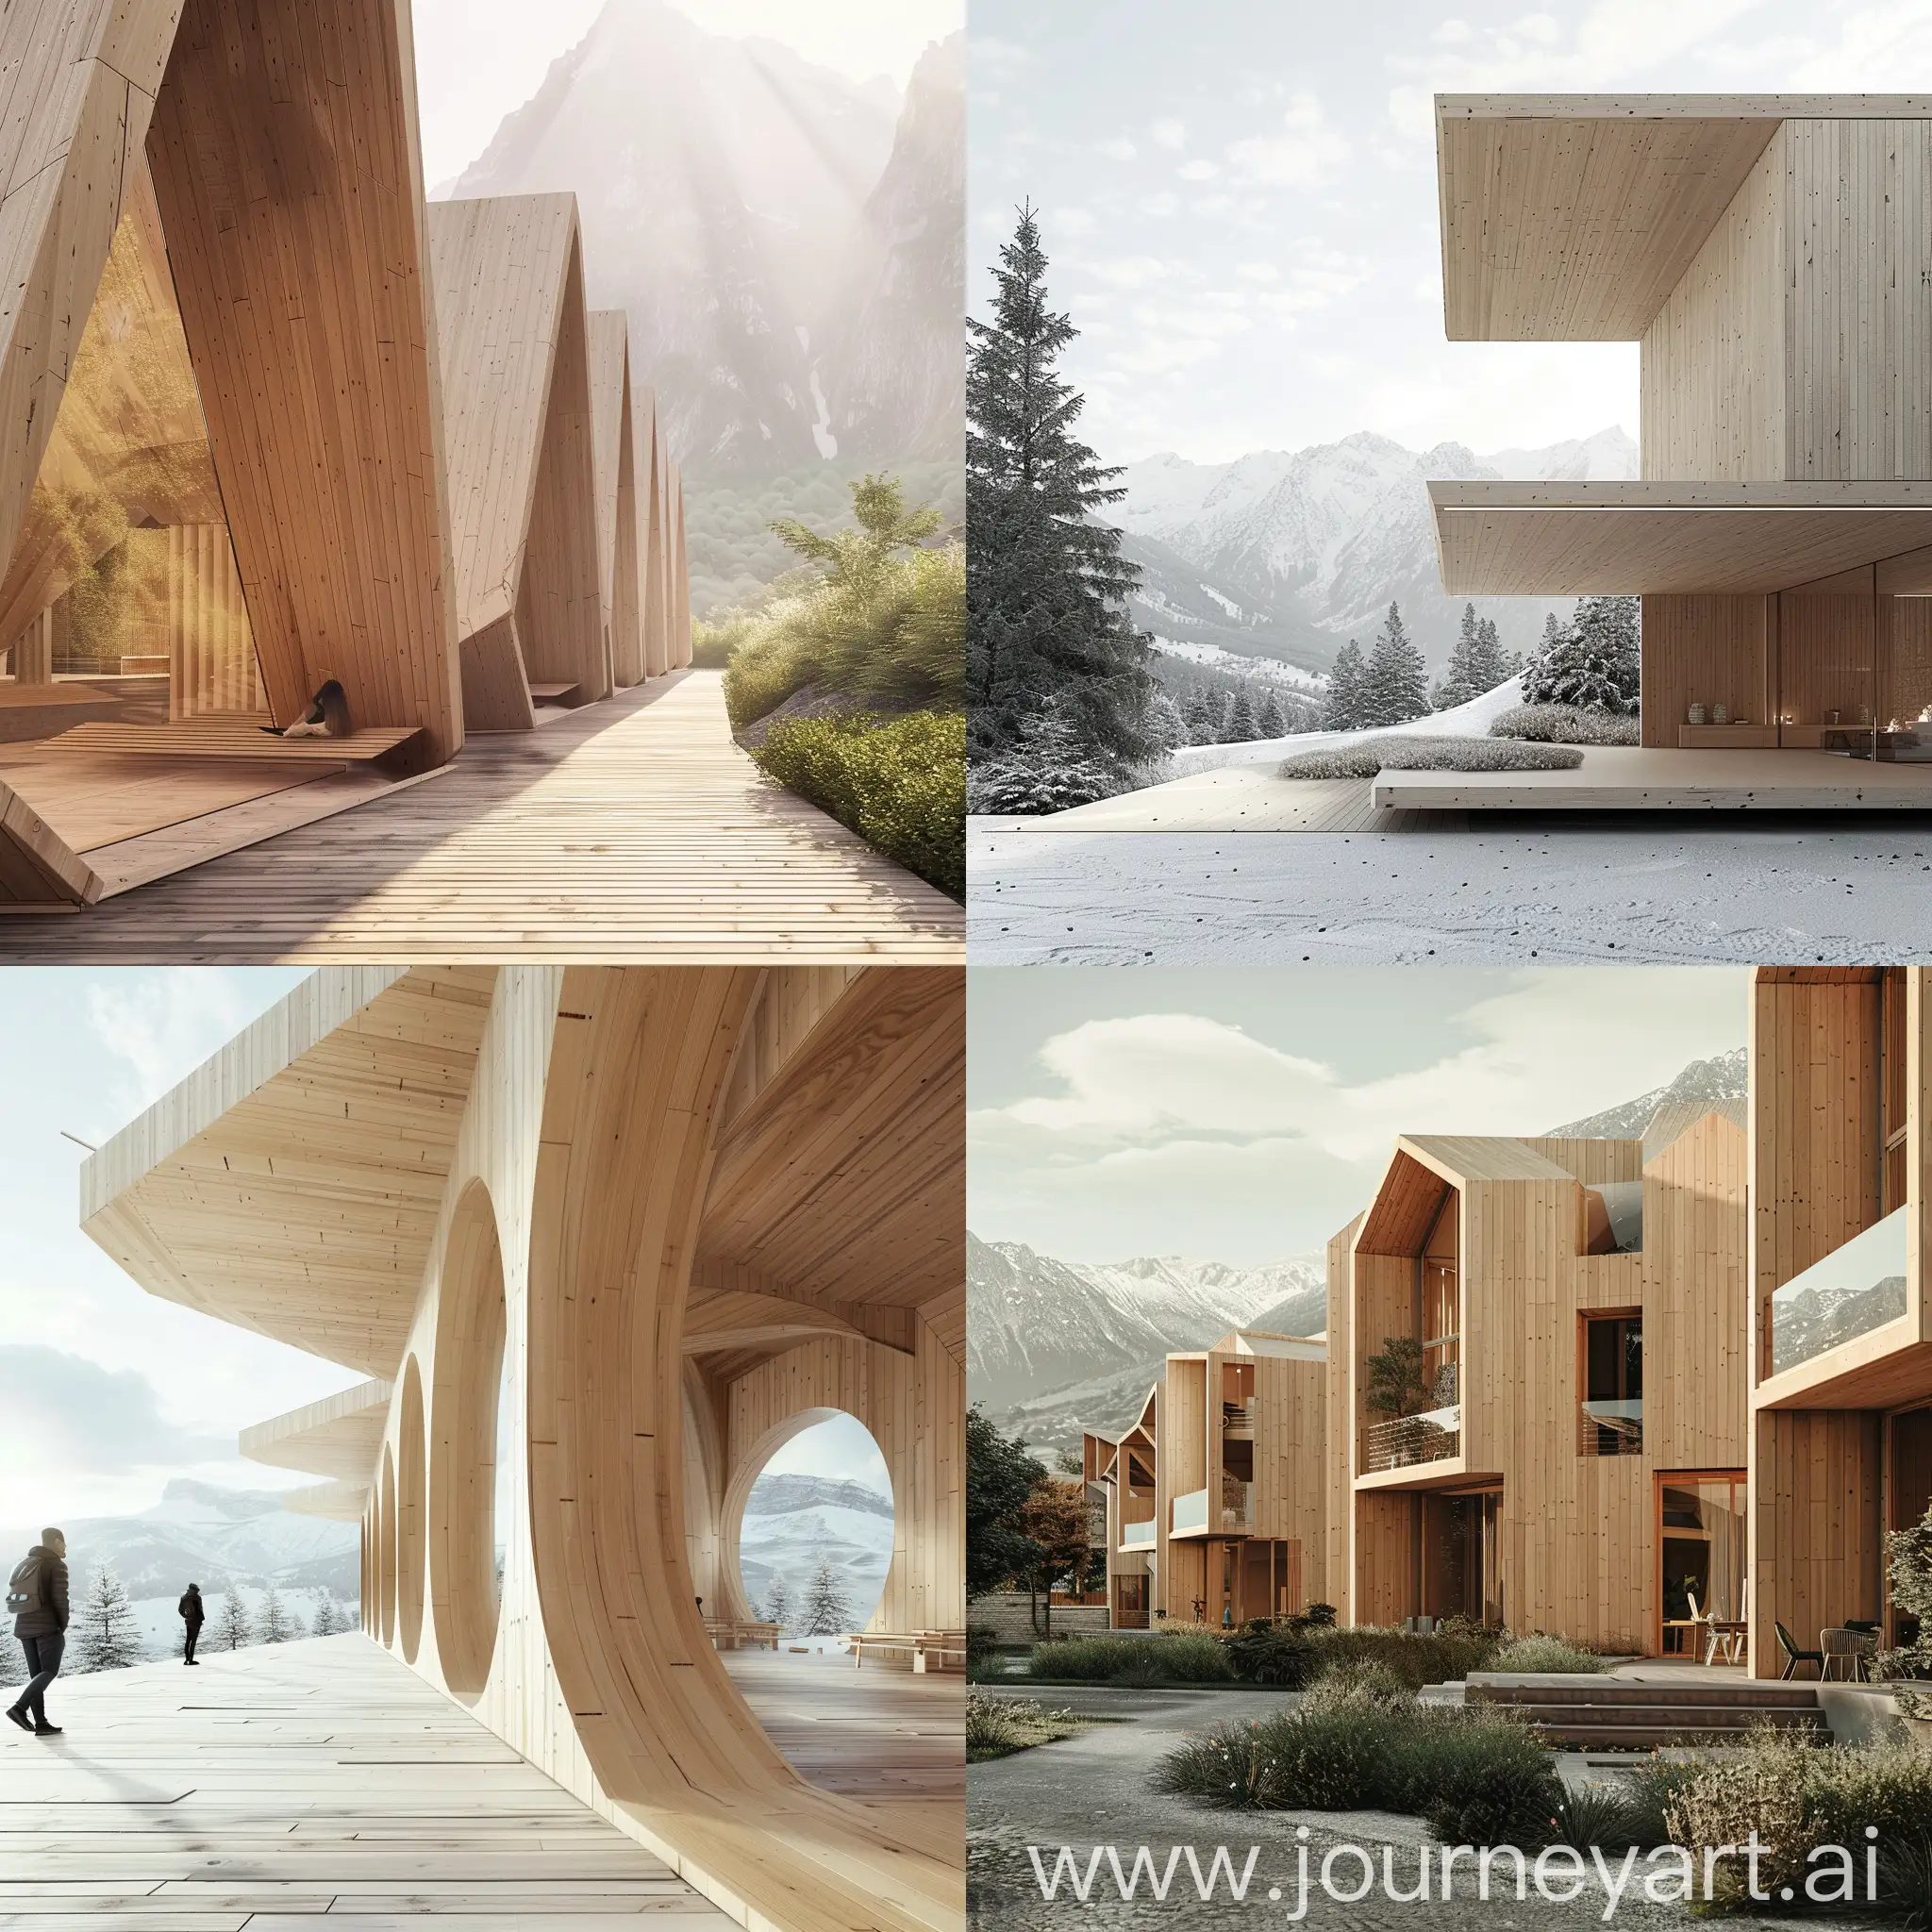 Detailed-Architectural-Render-of-Timber-Module-in-Line-with-Modular-Architecture-Principles